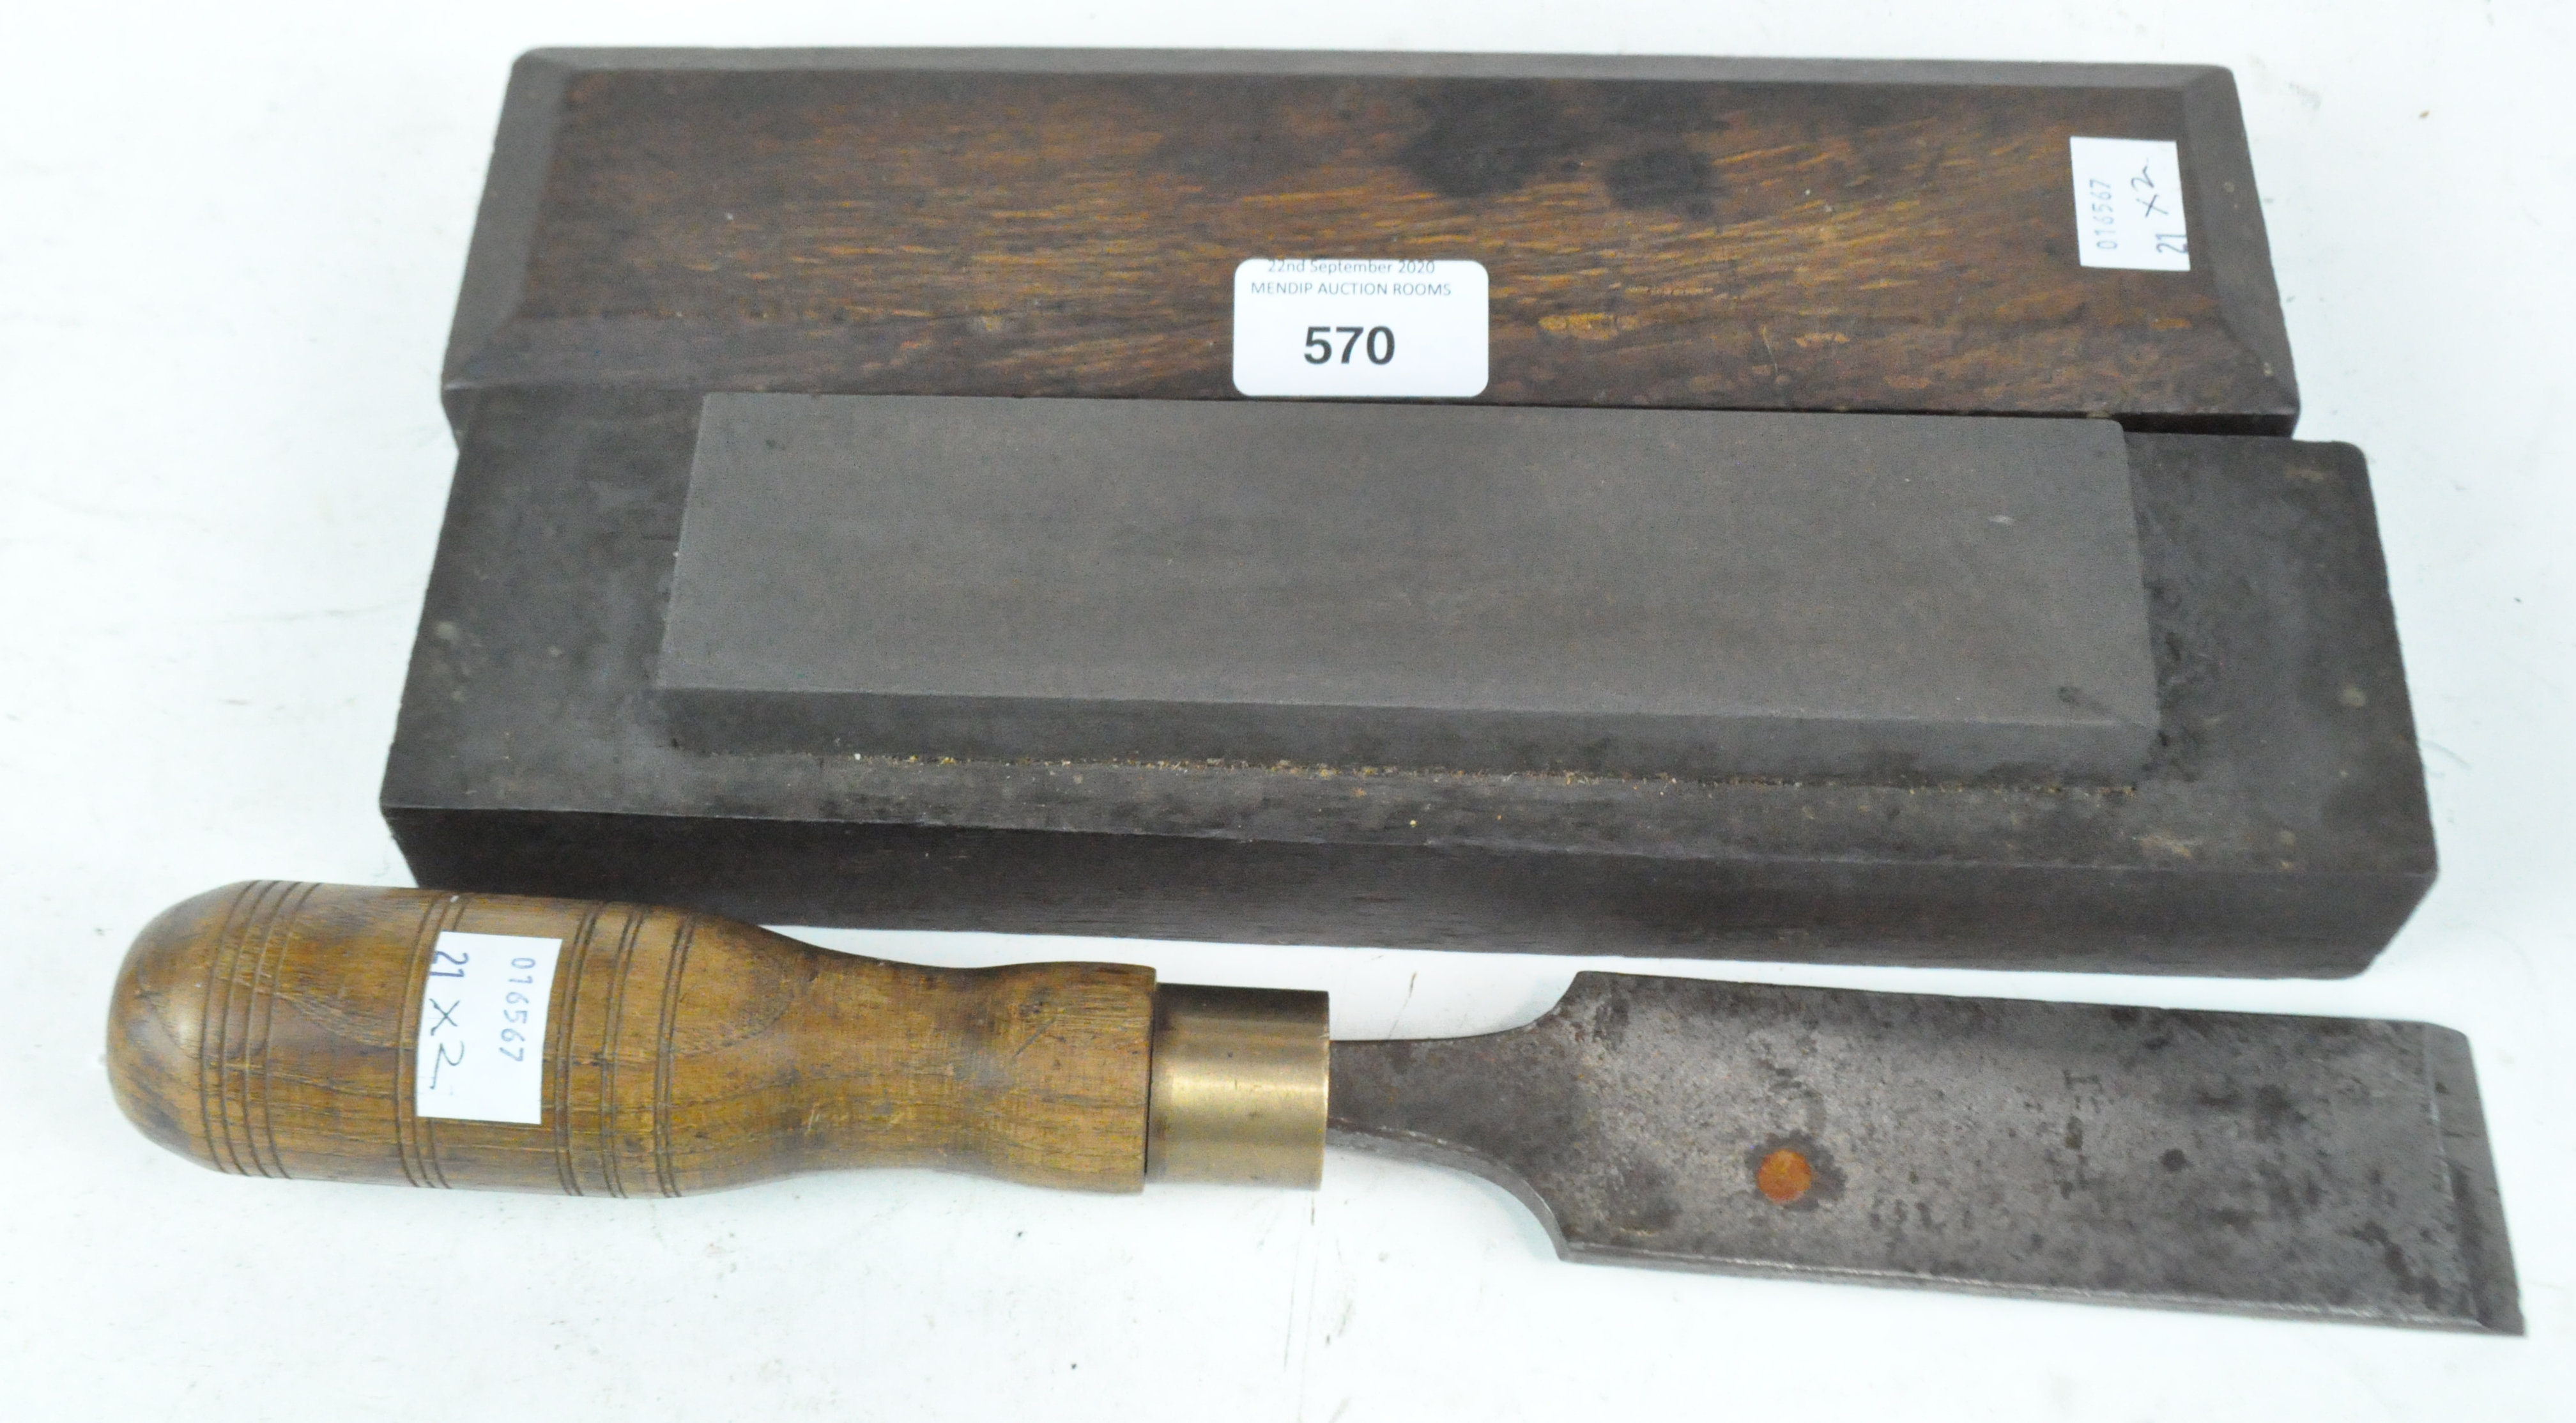 A large chisel and an oak cased sharpener